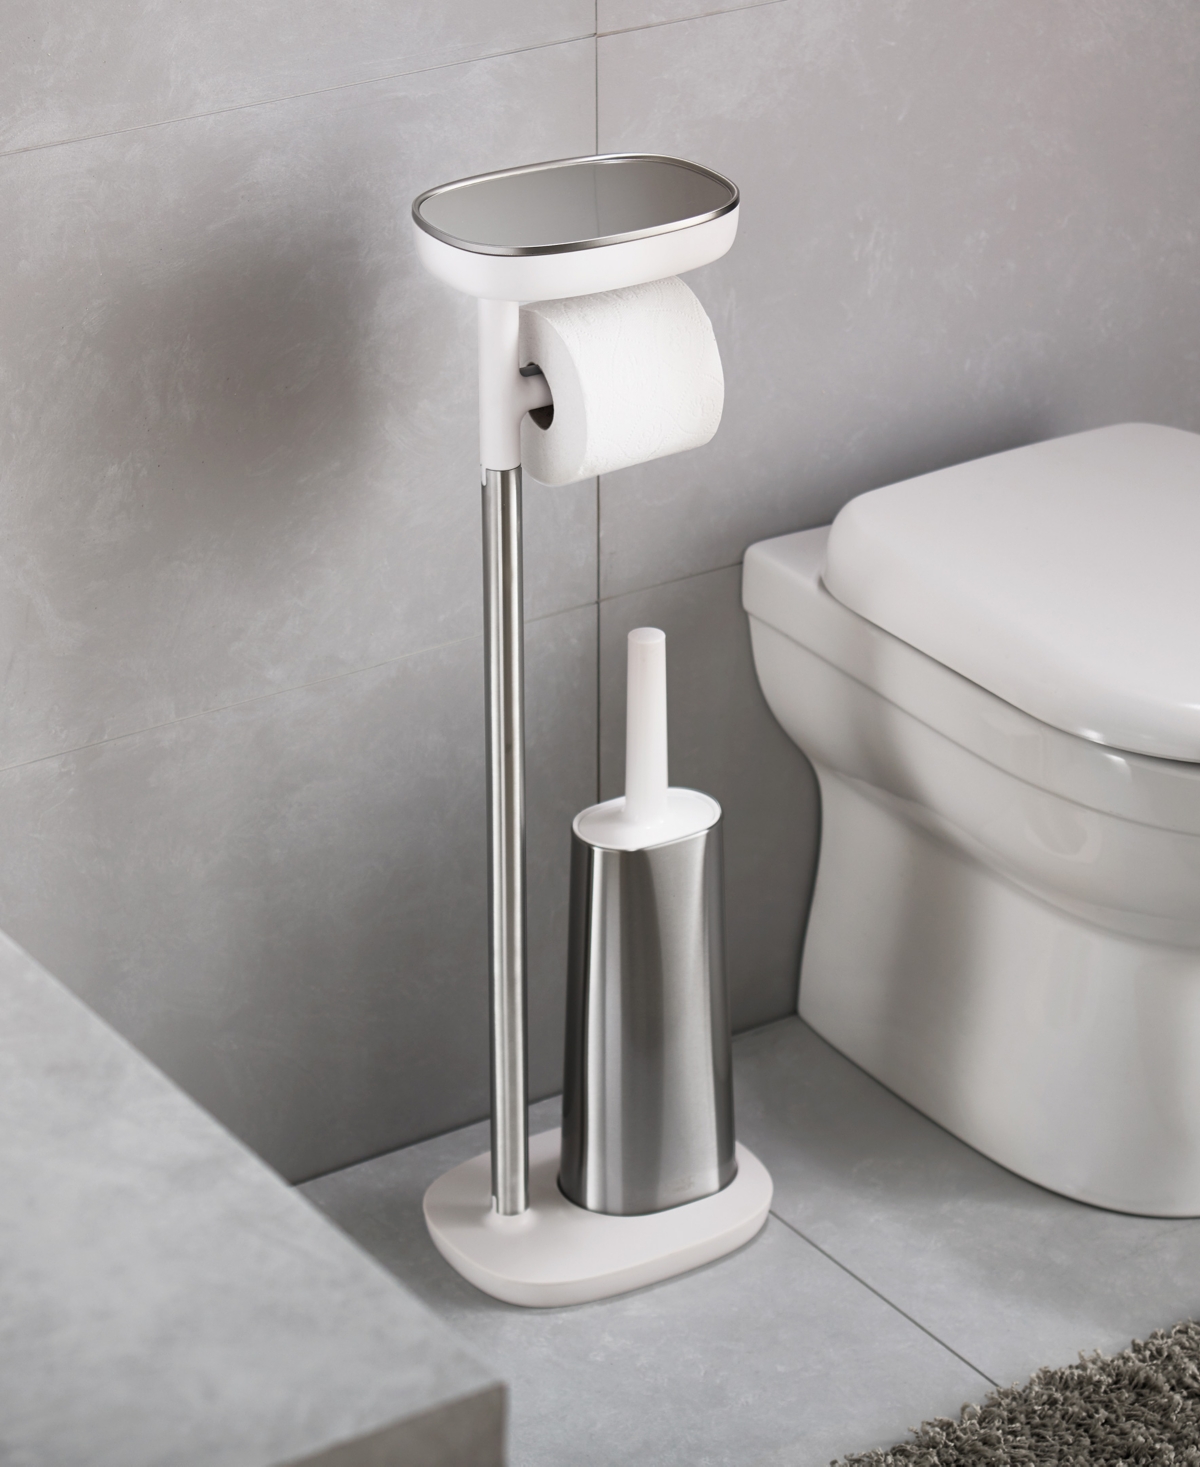 EasyStore Standing Toilet Paper Holder and Flex Steel Toilet Brush - Silver